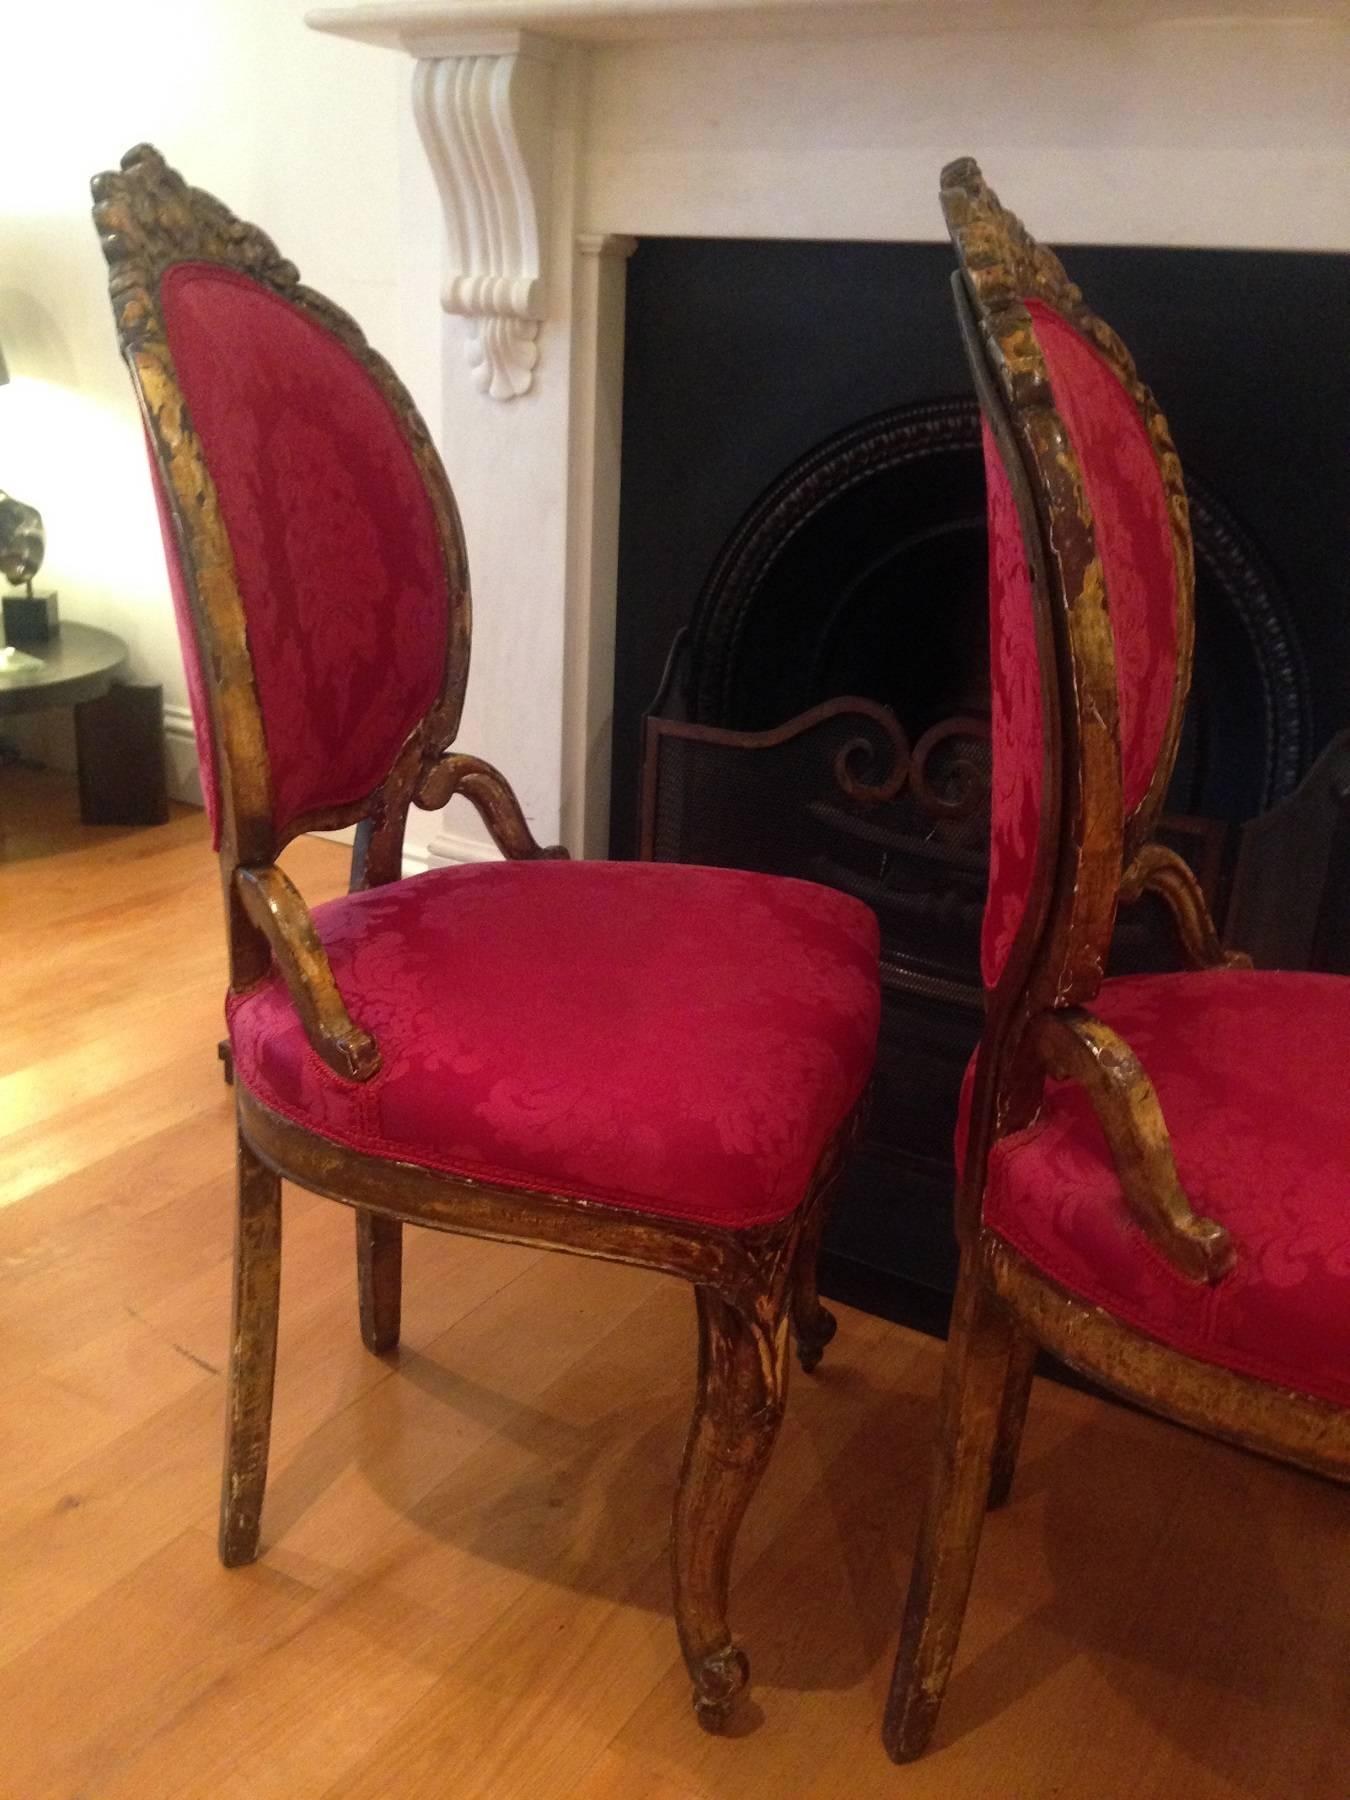 Pair of 18th Century Italian Baroque Giltwood Chairs Upholstered in Damask For Sale 4